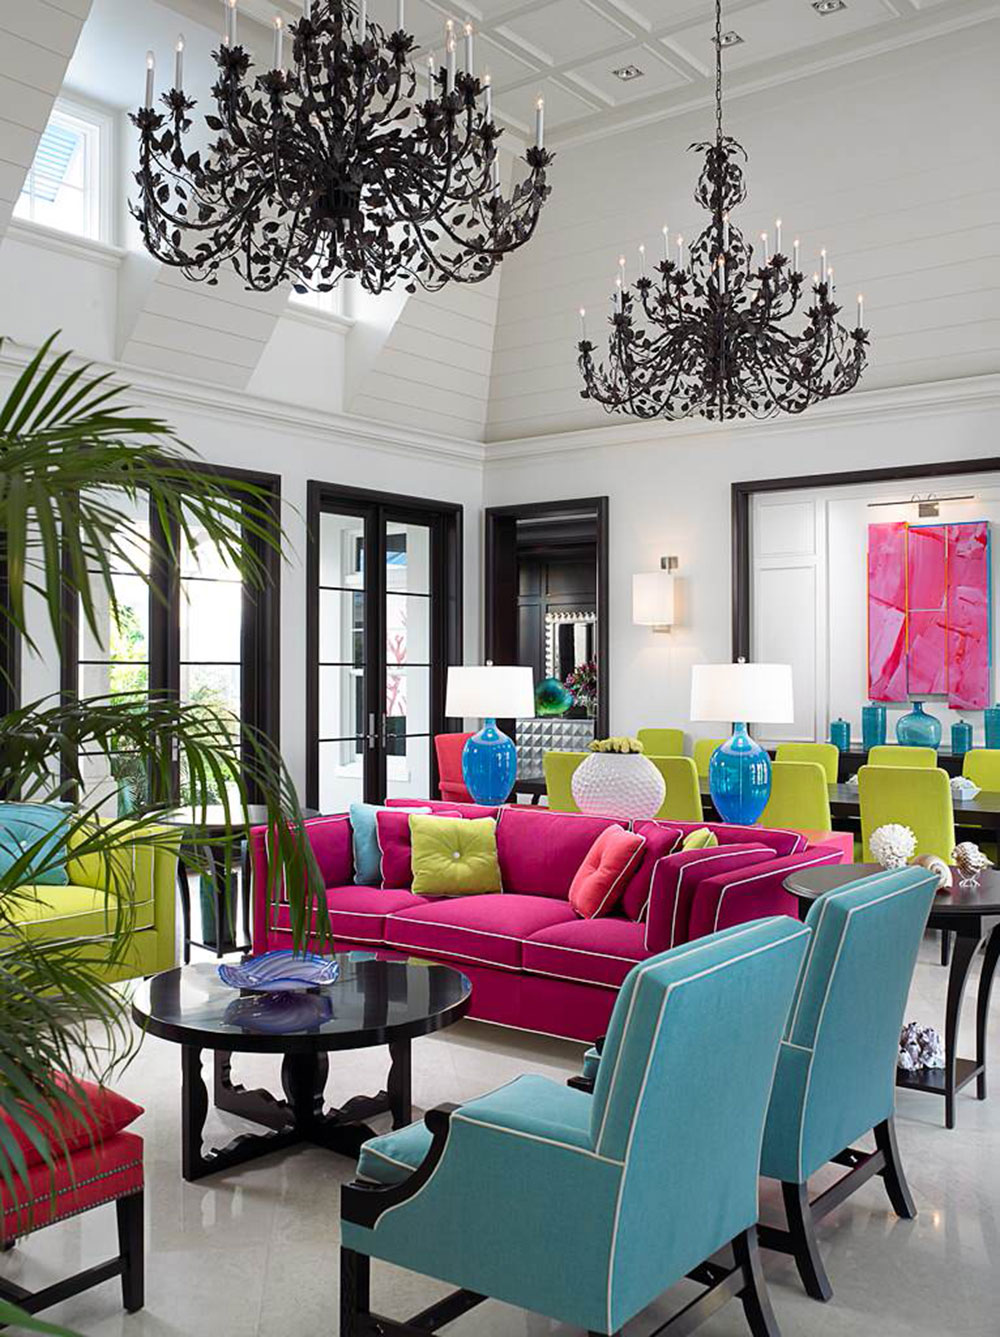 Ideas for decorating your home with bold colors 3 ideas for decorating your home with bold colors